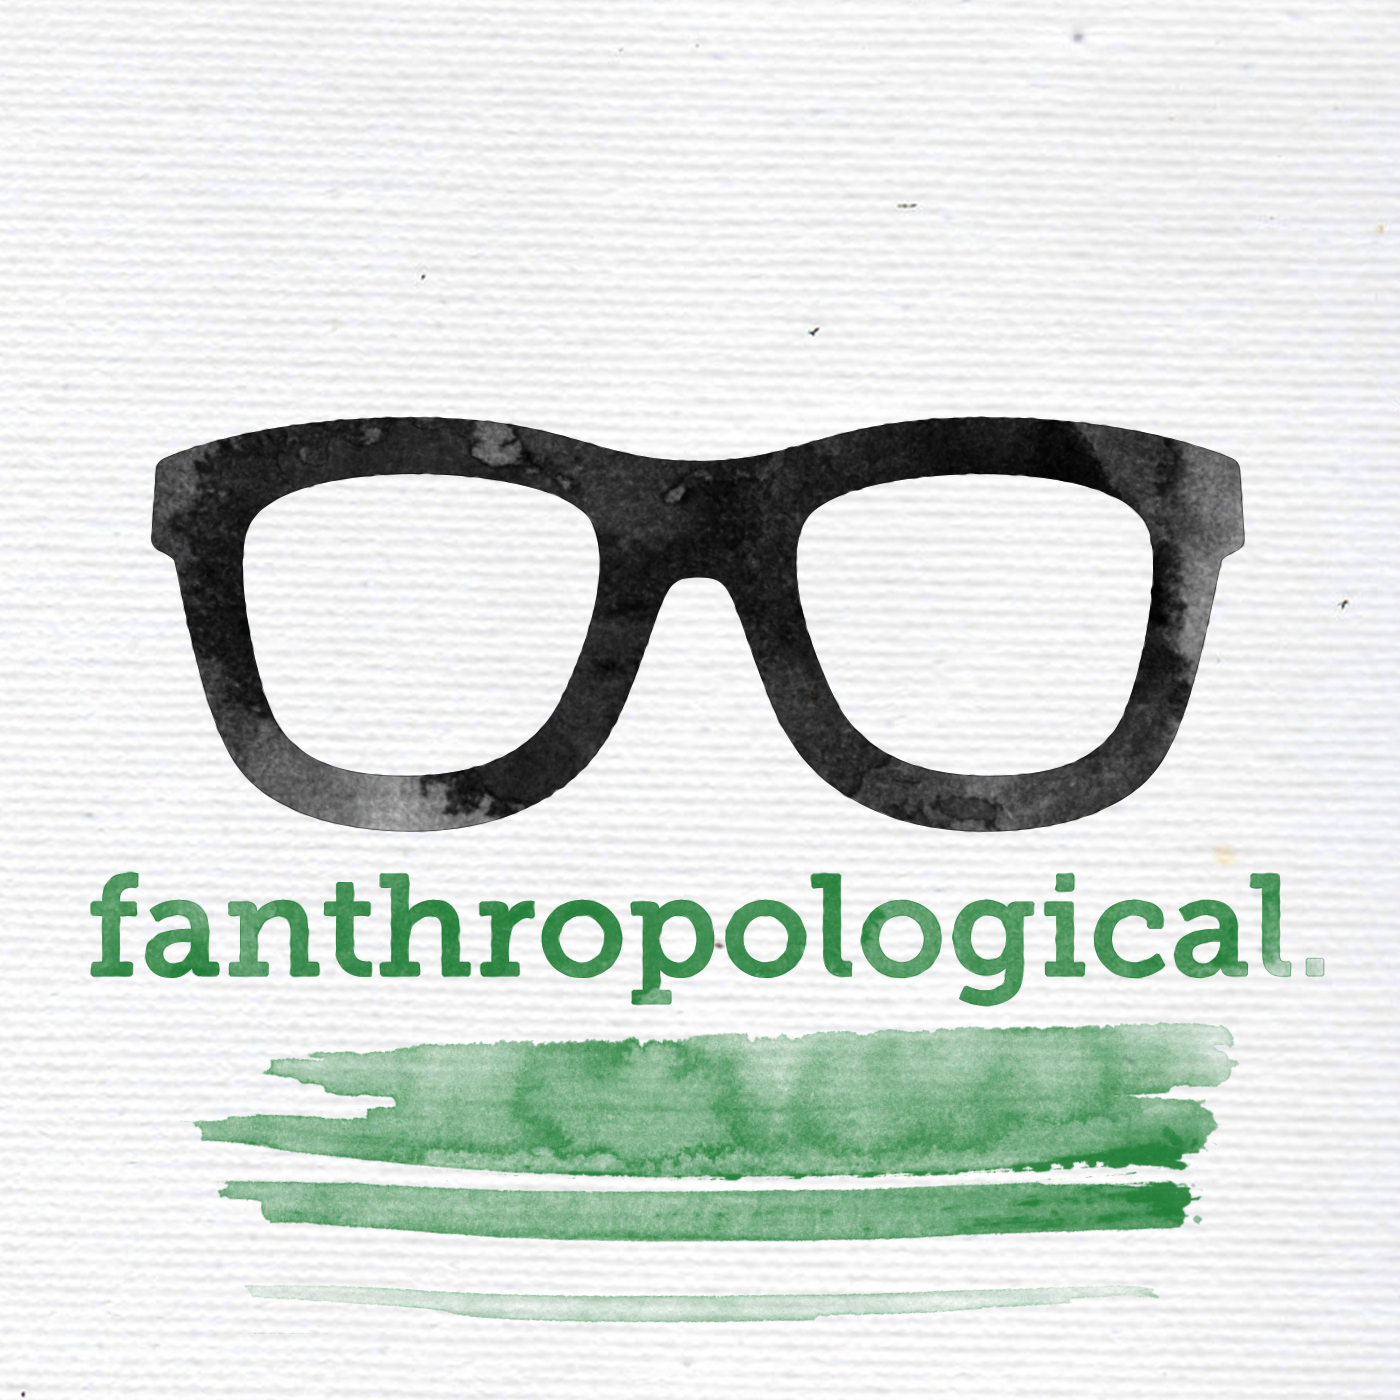 Fanthropological Finale: In the End